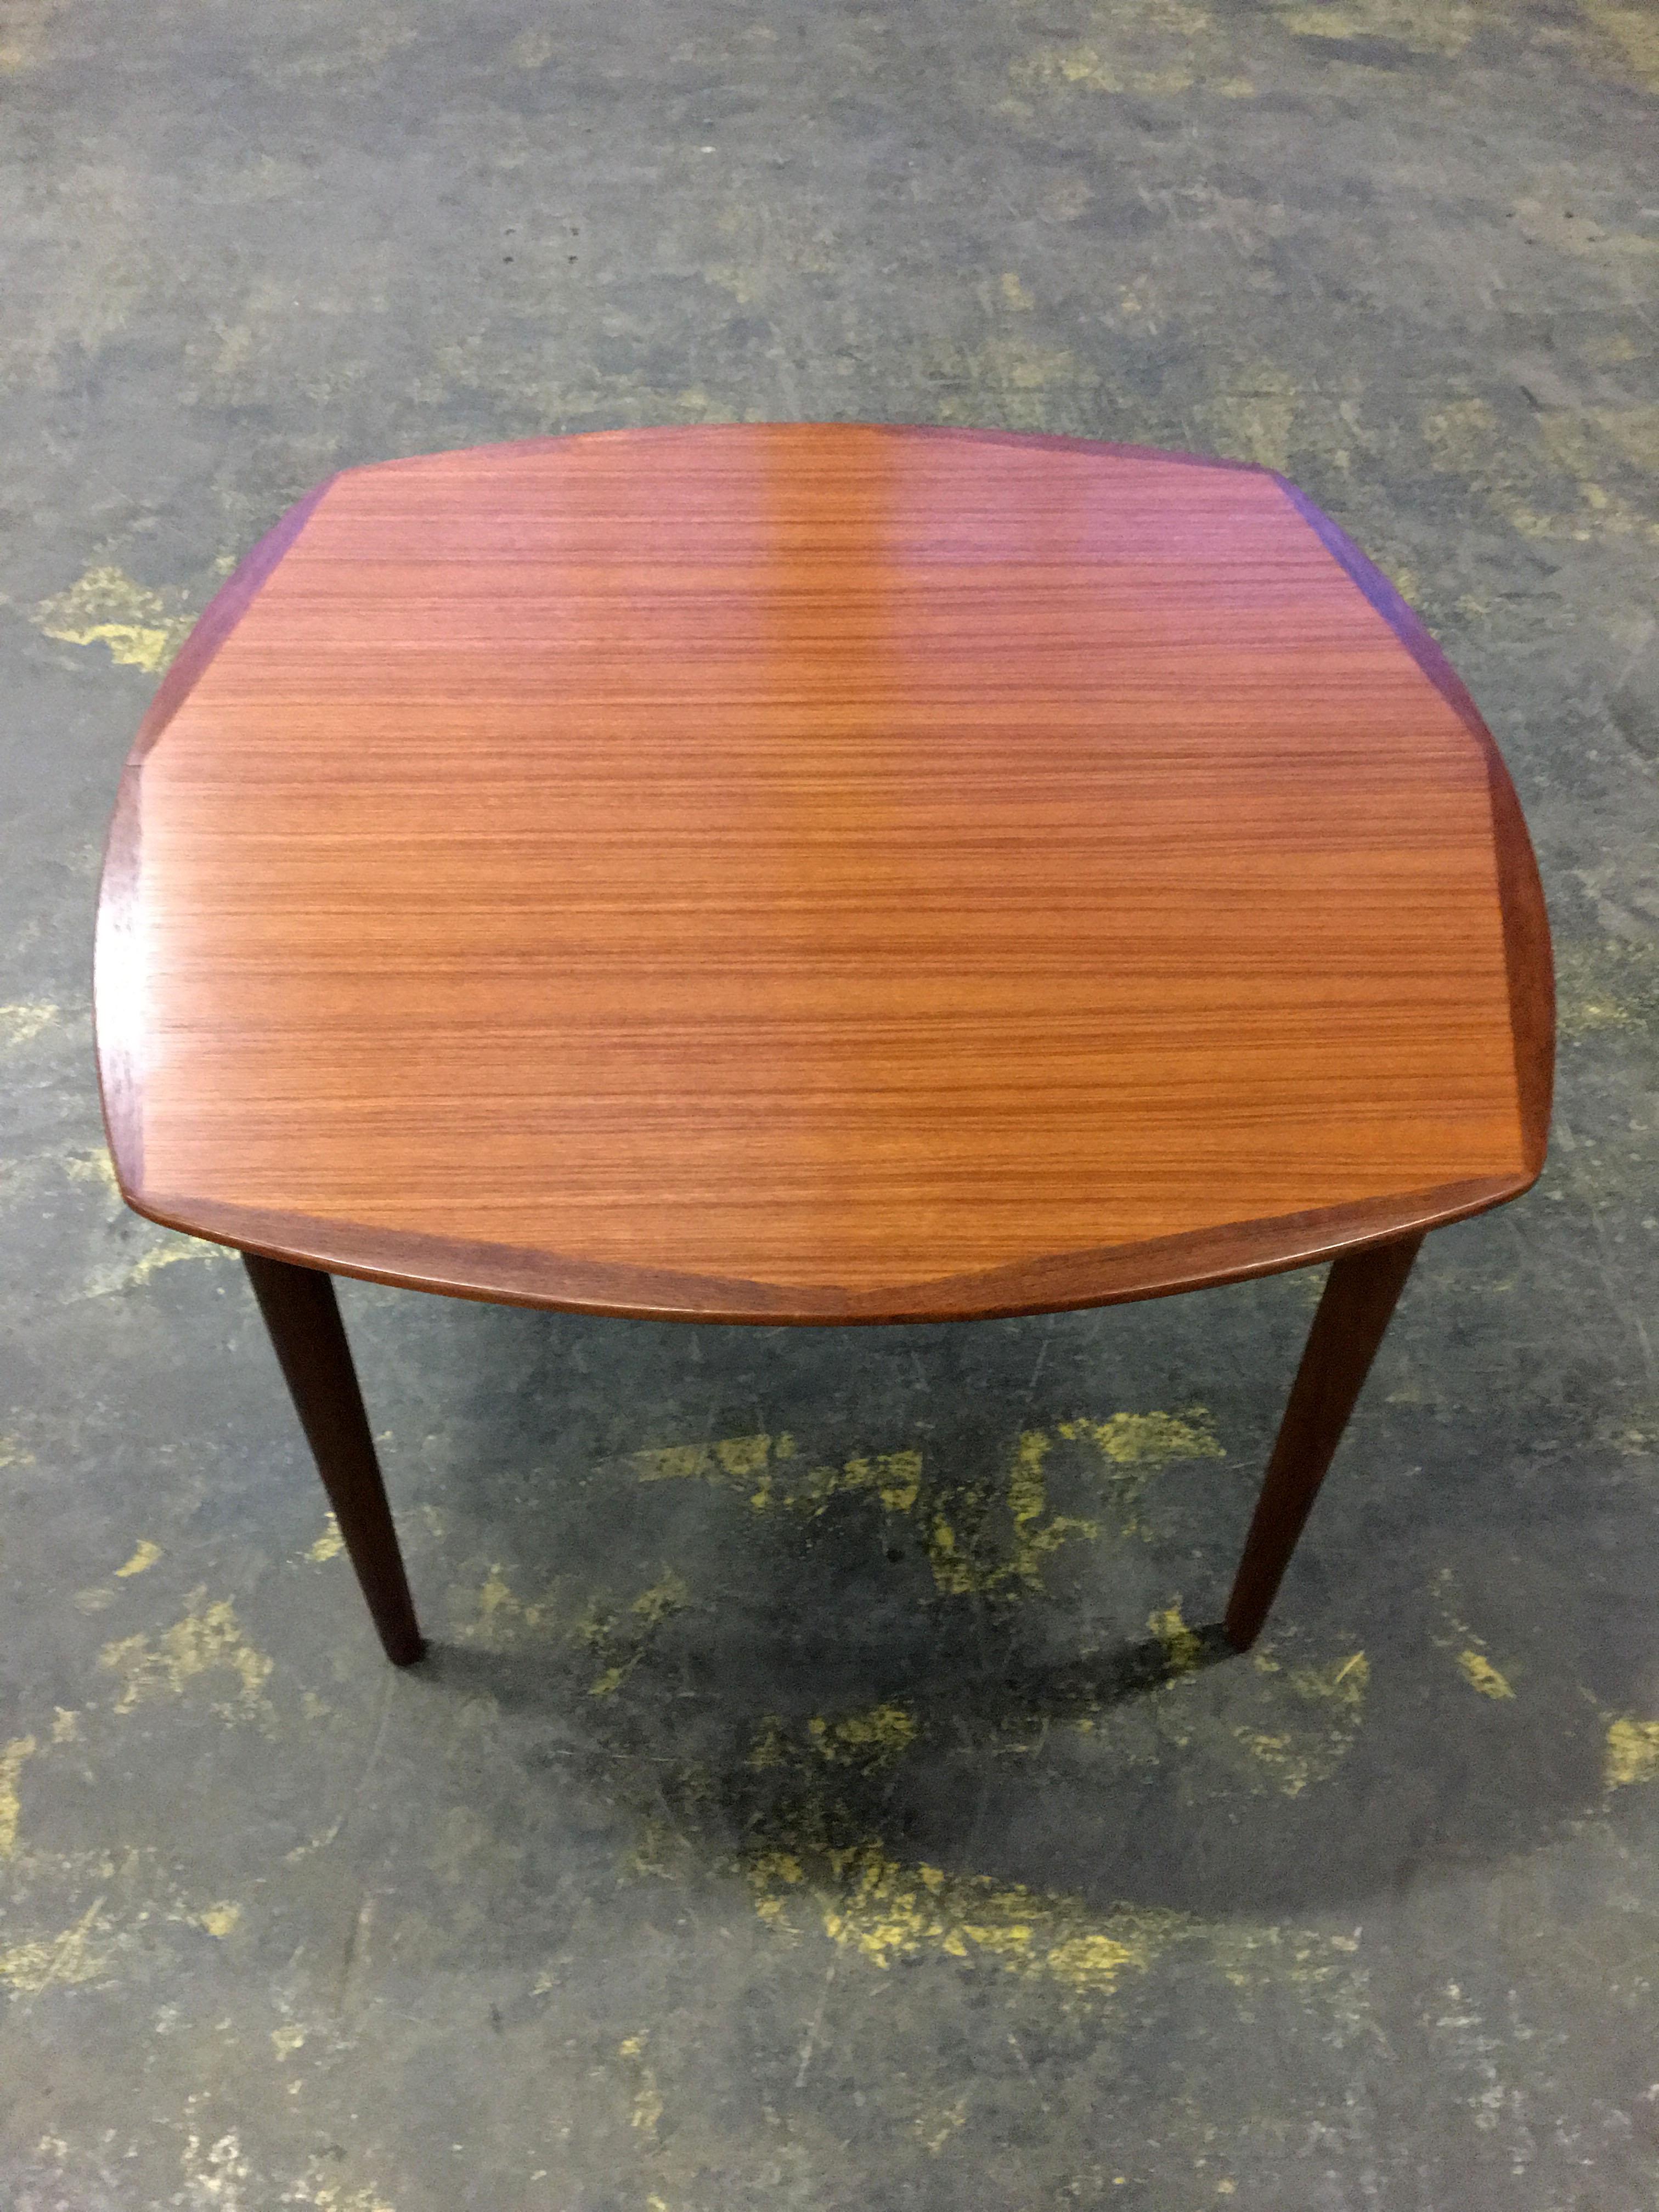 A lovely Scandinavian dining table by Gustav Bahus, Norway 1960s. Not square nor circular, the table mixes both shapes to create a beautiful unusual design. The table top is framed by a corner edge, accented in a darker shade of teak. The legs